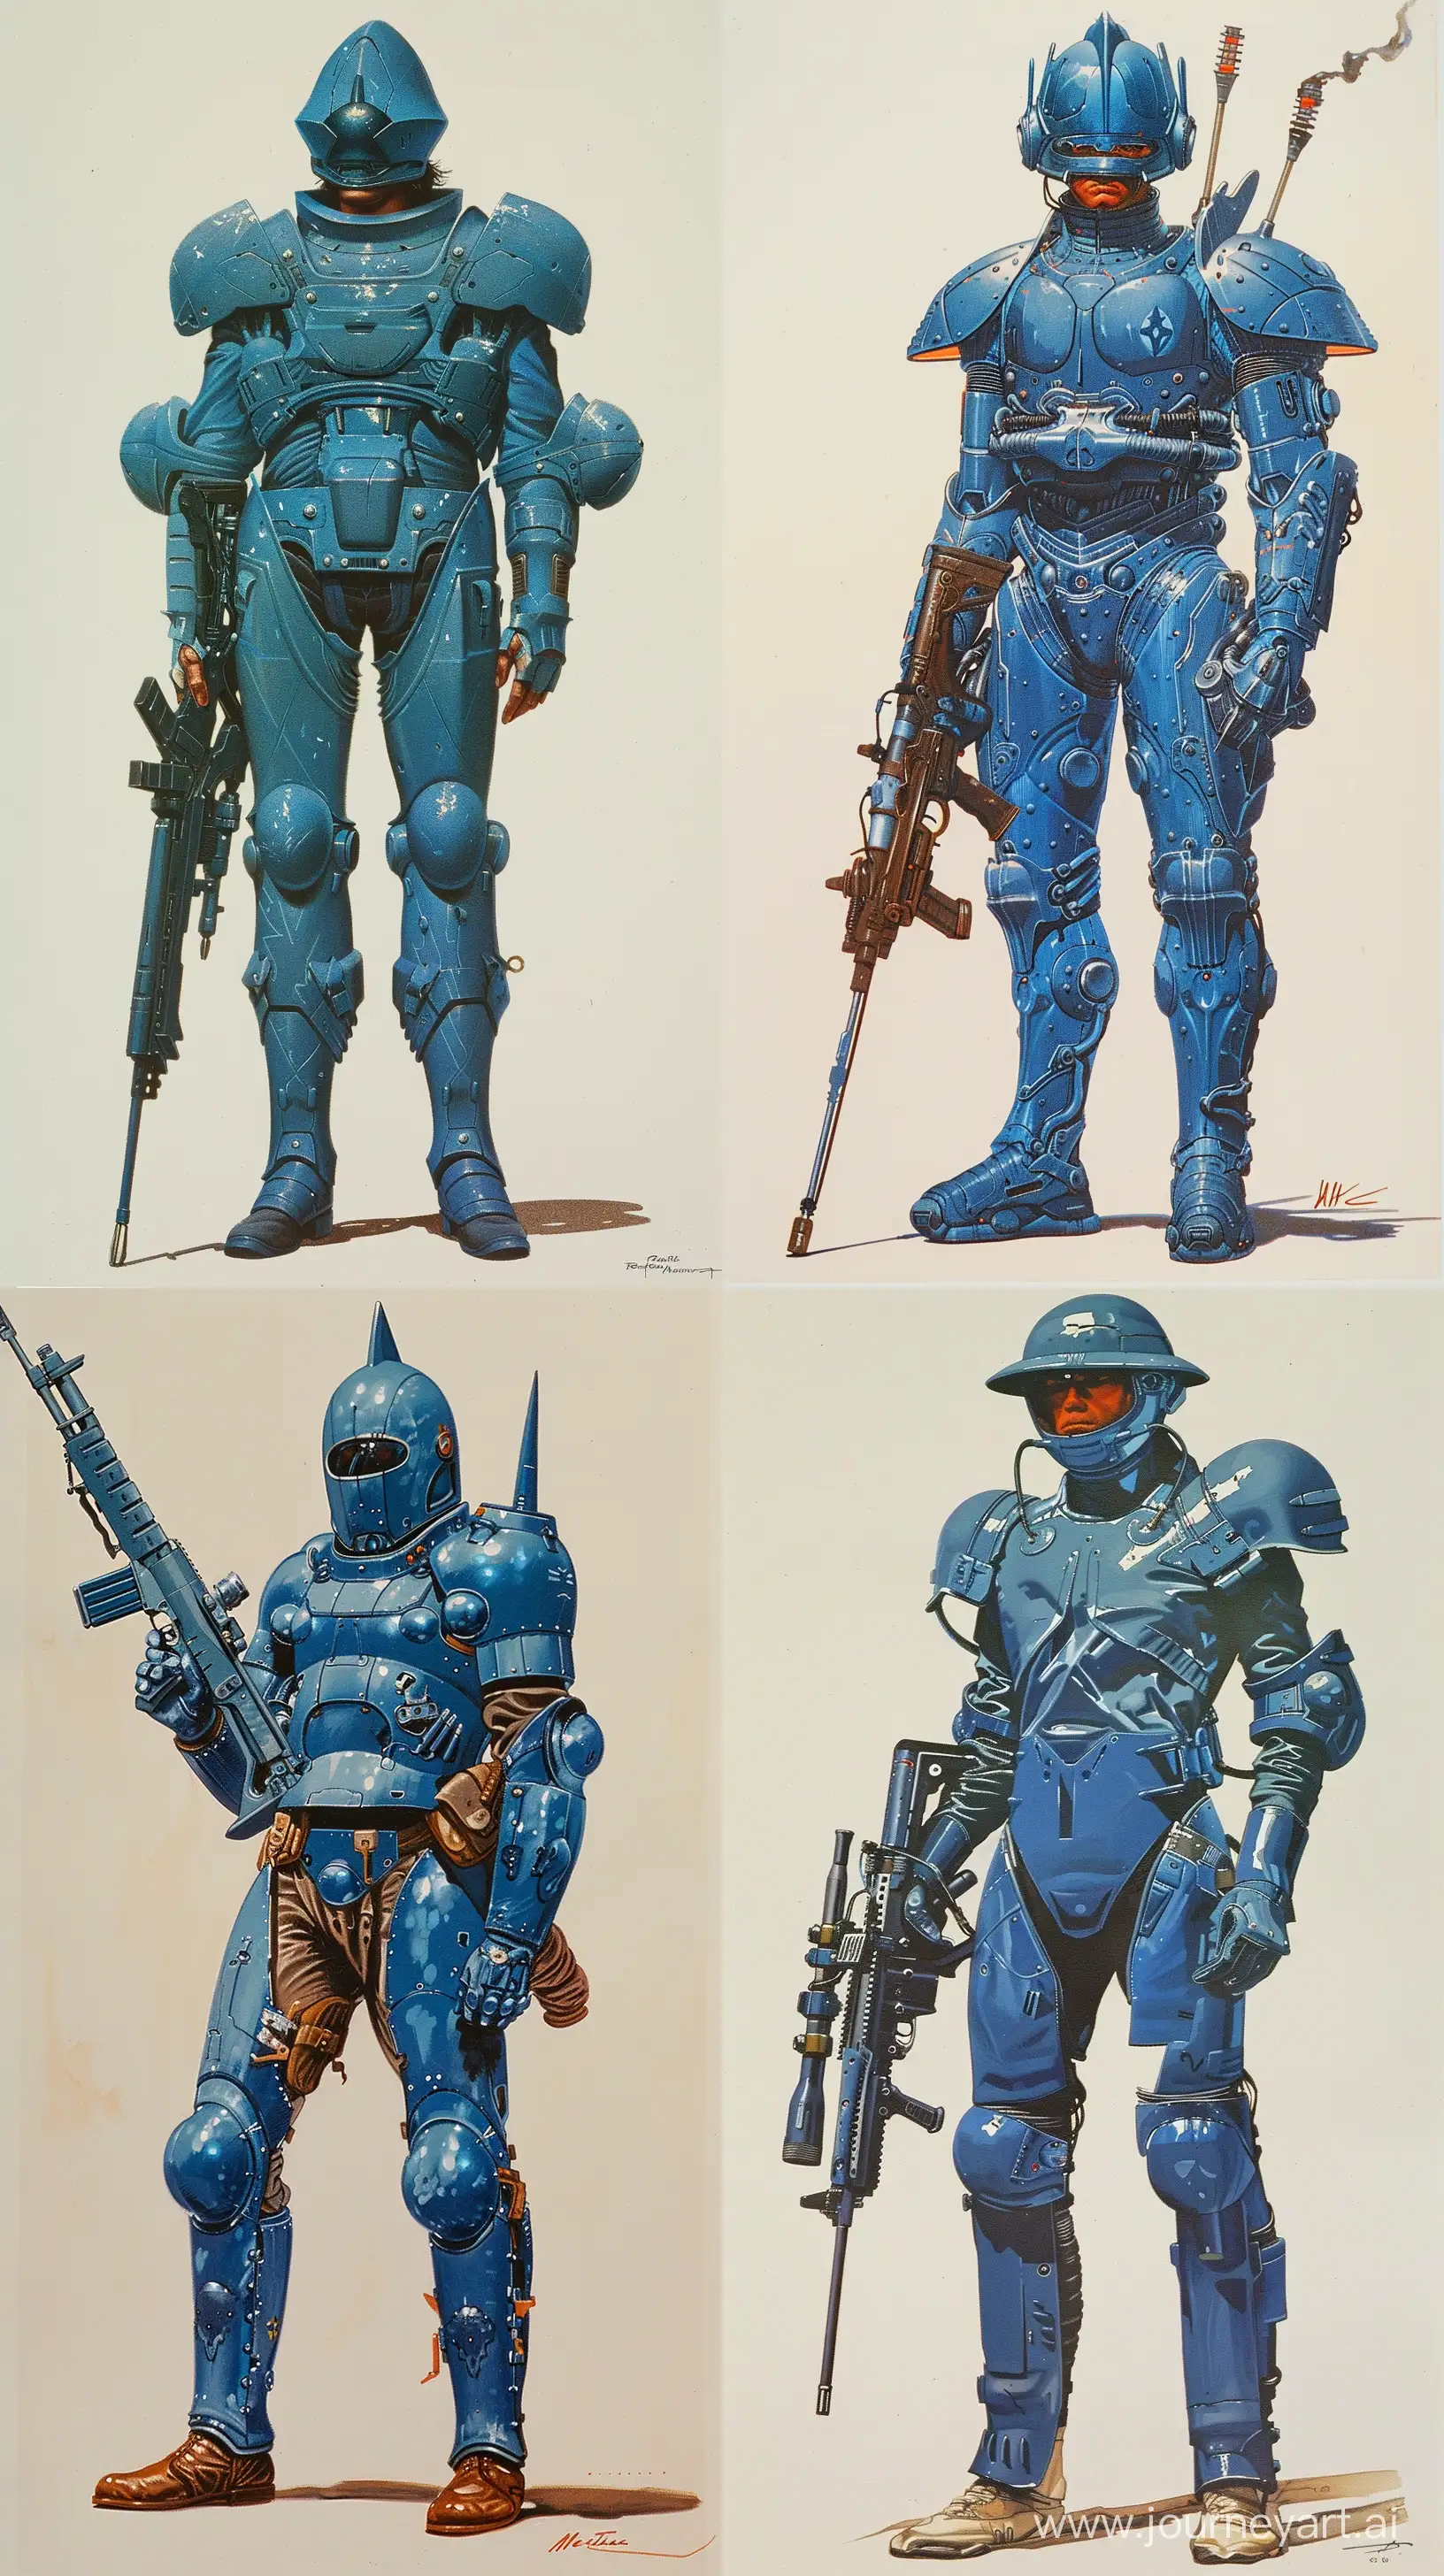 A tall man wearing a blue knight-like helmet and wearing a suit of blue plated knight-like military armor and holding a futuristic rifle painted by Ralph McQuarrie. entire body shown. feet shown. tall frame. retro science fiction art style. --ar 9:16

